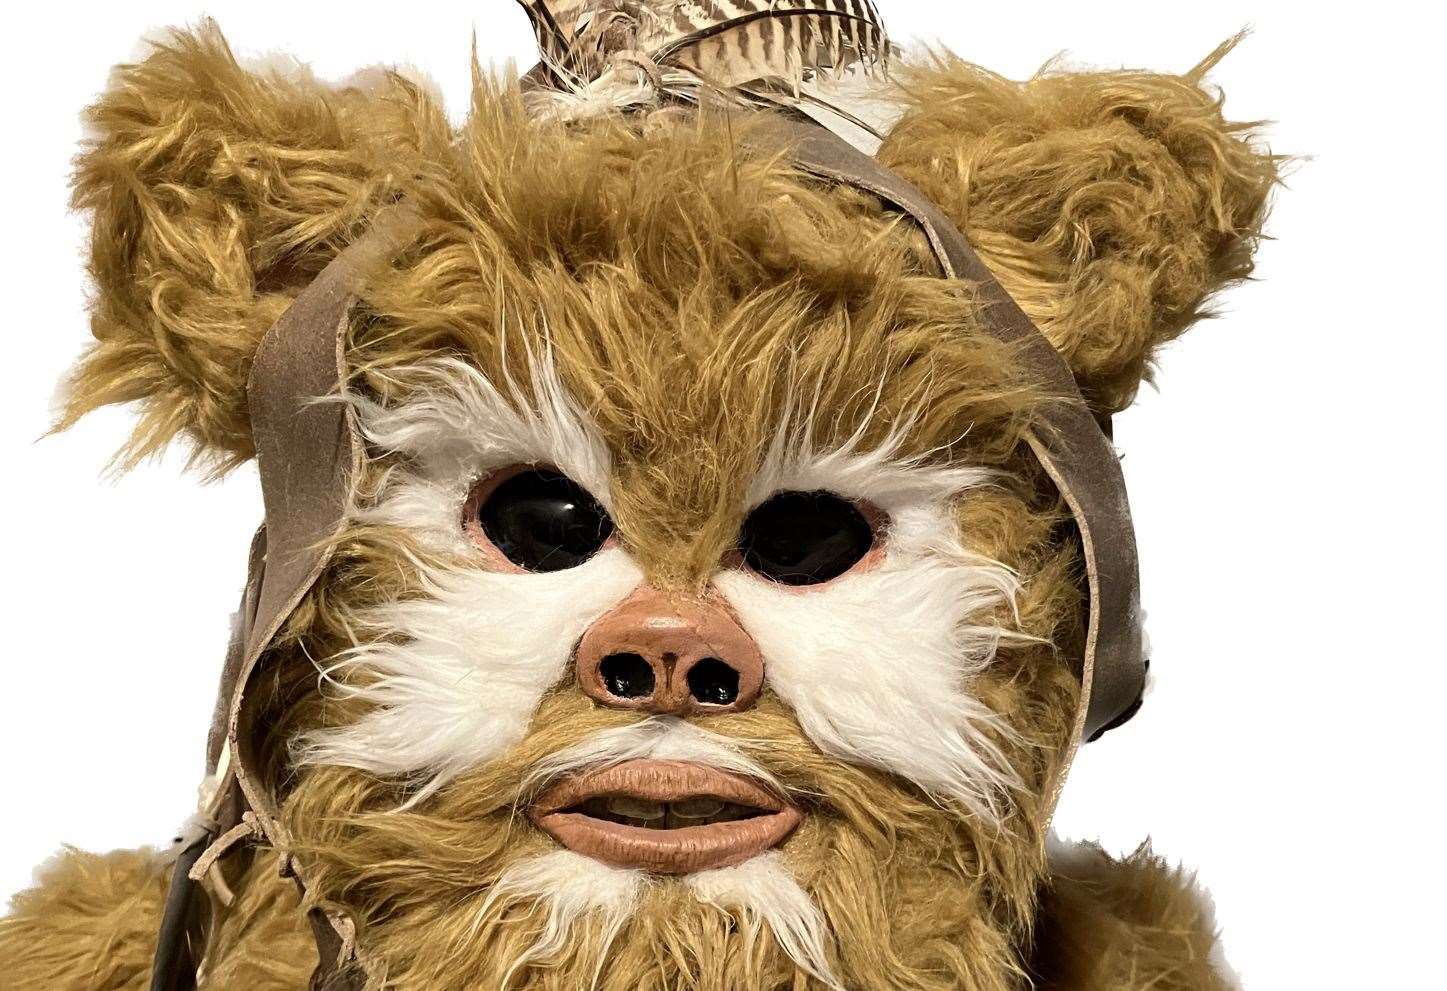 An Ewok mask from Return of the Jedi. Picture submitted